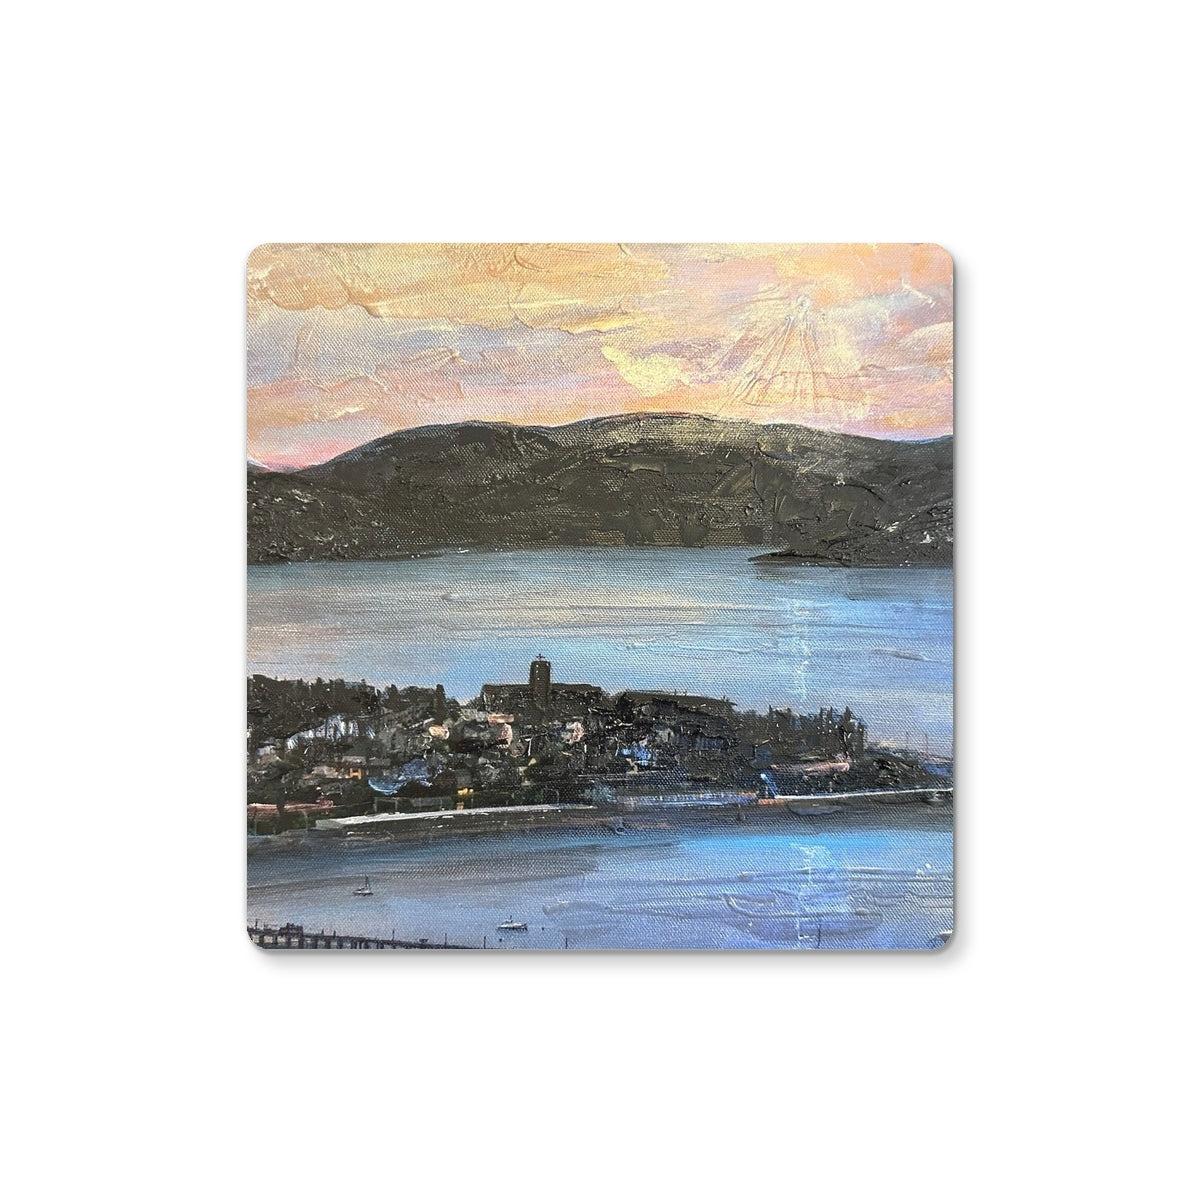 From Lyle Hill Art Gifts Coaster-Coasters-River Clyde Art Gallery-Single Coaster-Paintings, Prints, Homeware, Art Gifts From Scotland By Scottish Artist Kevin Hunter